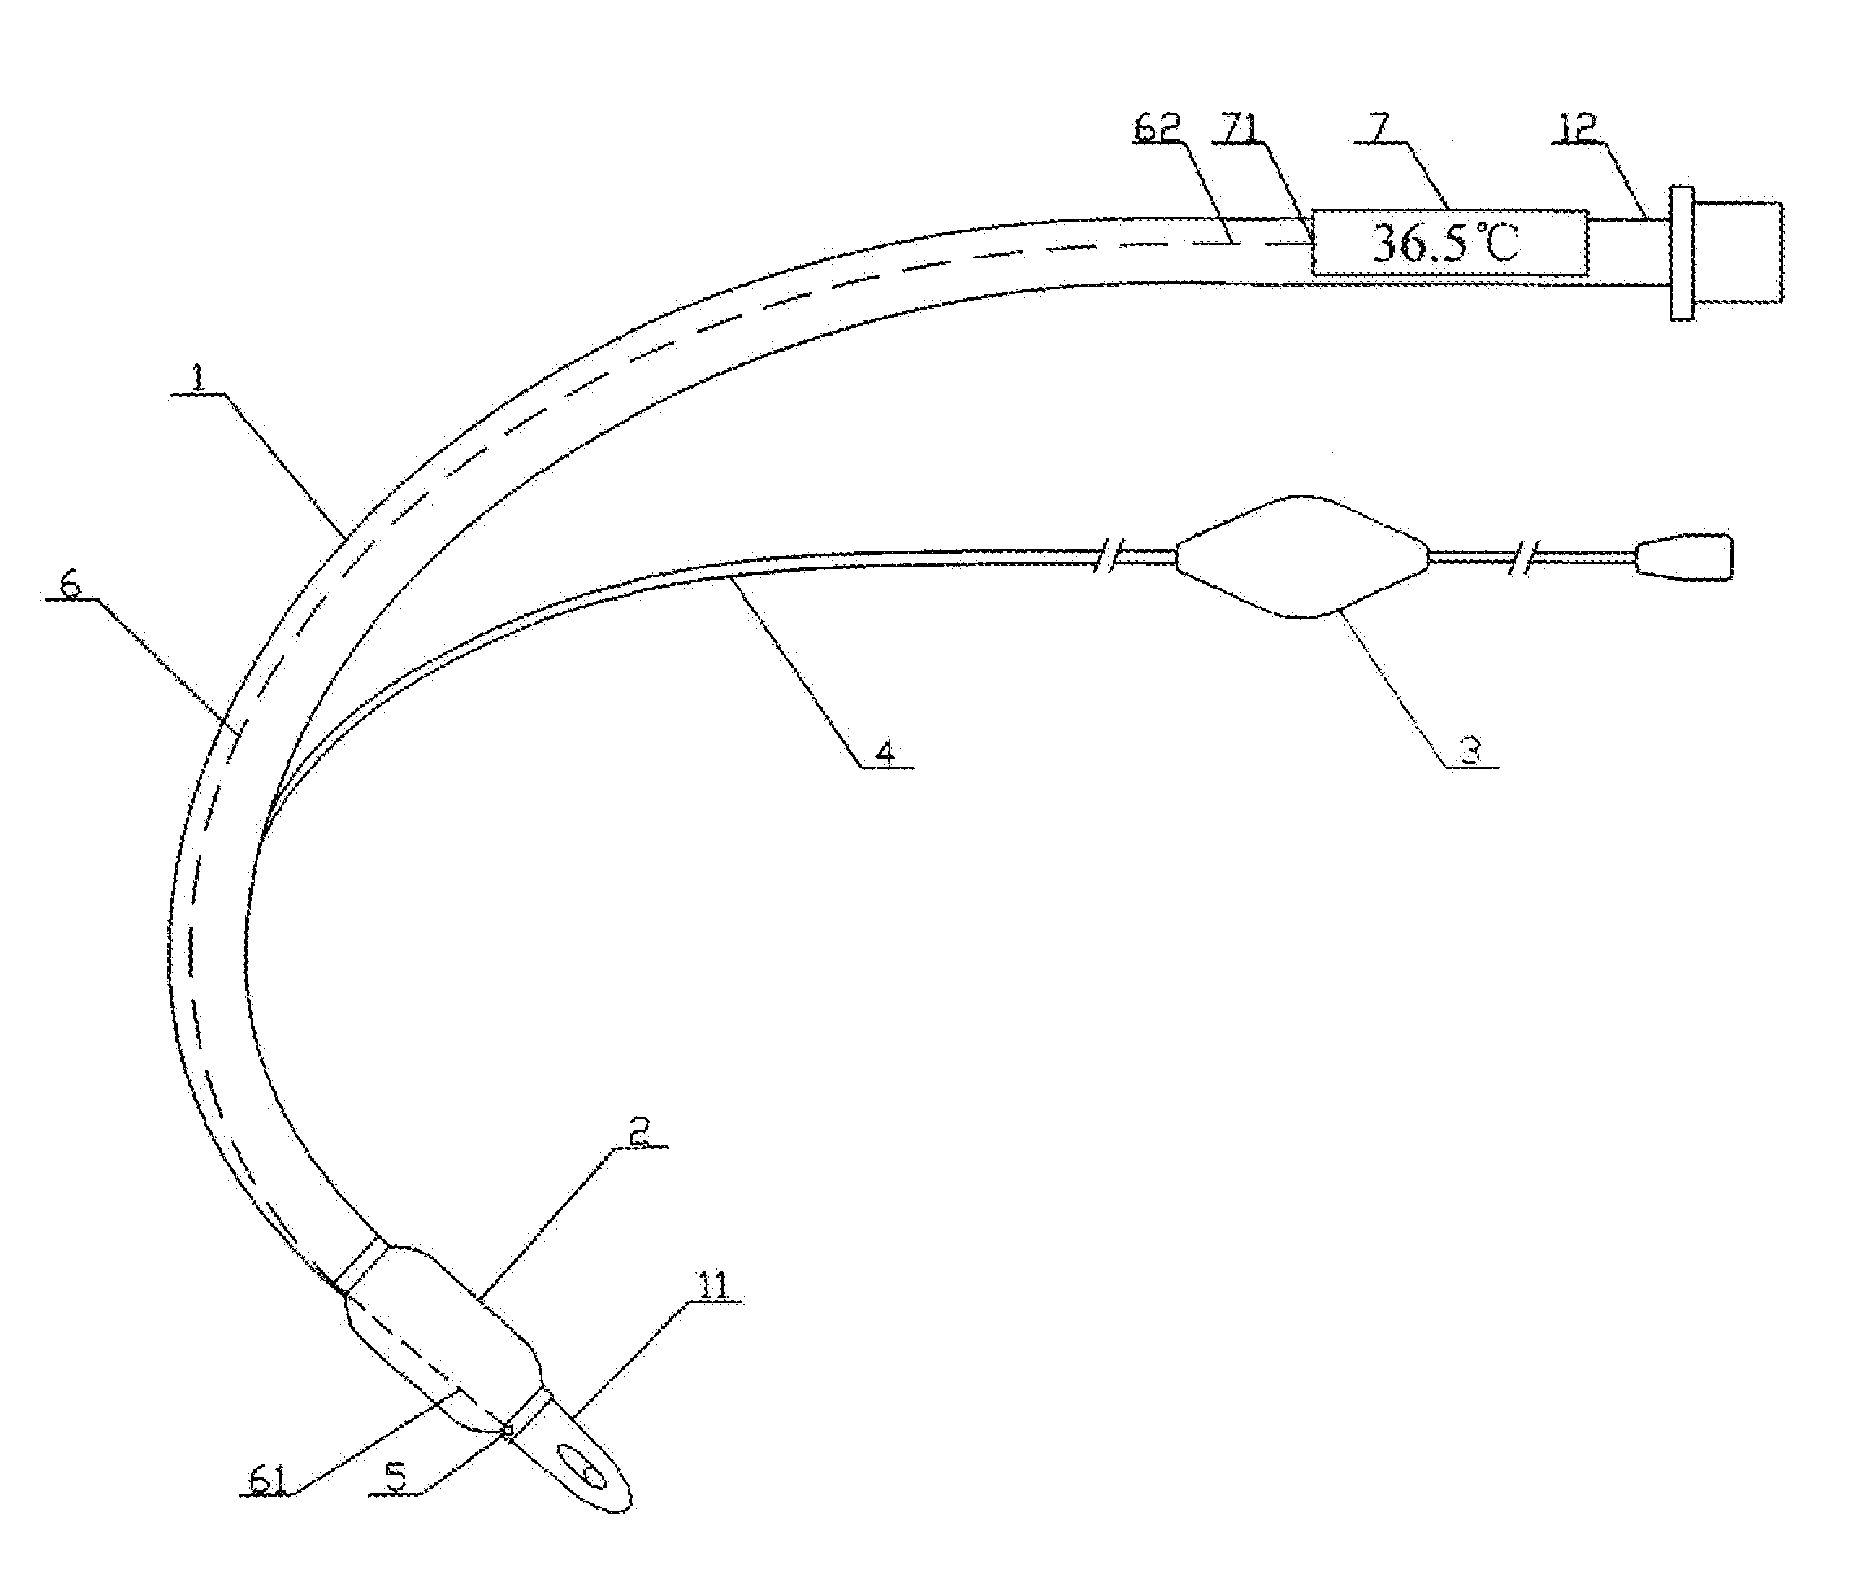 Artificial Airway with Integrated Core Temperature Monitor